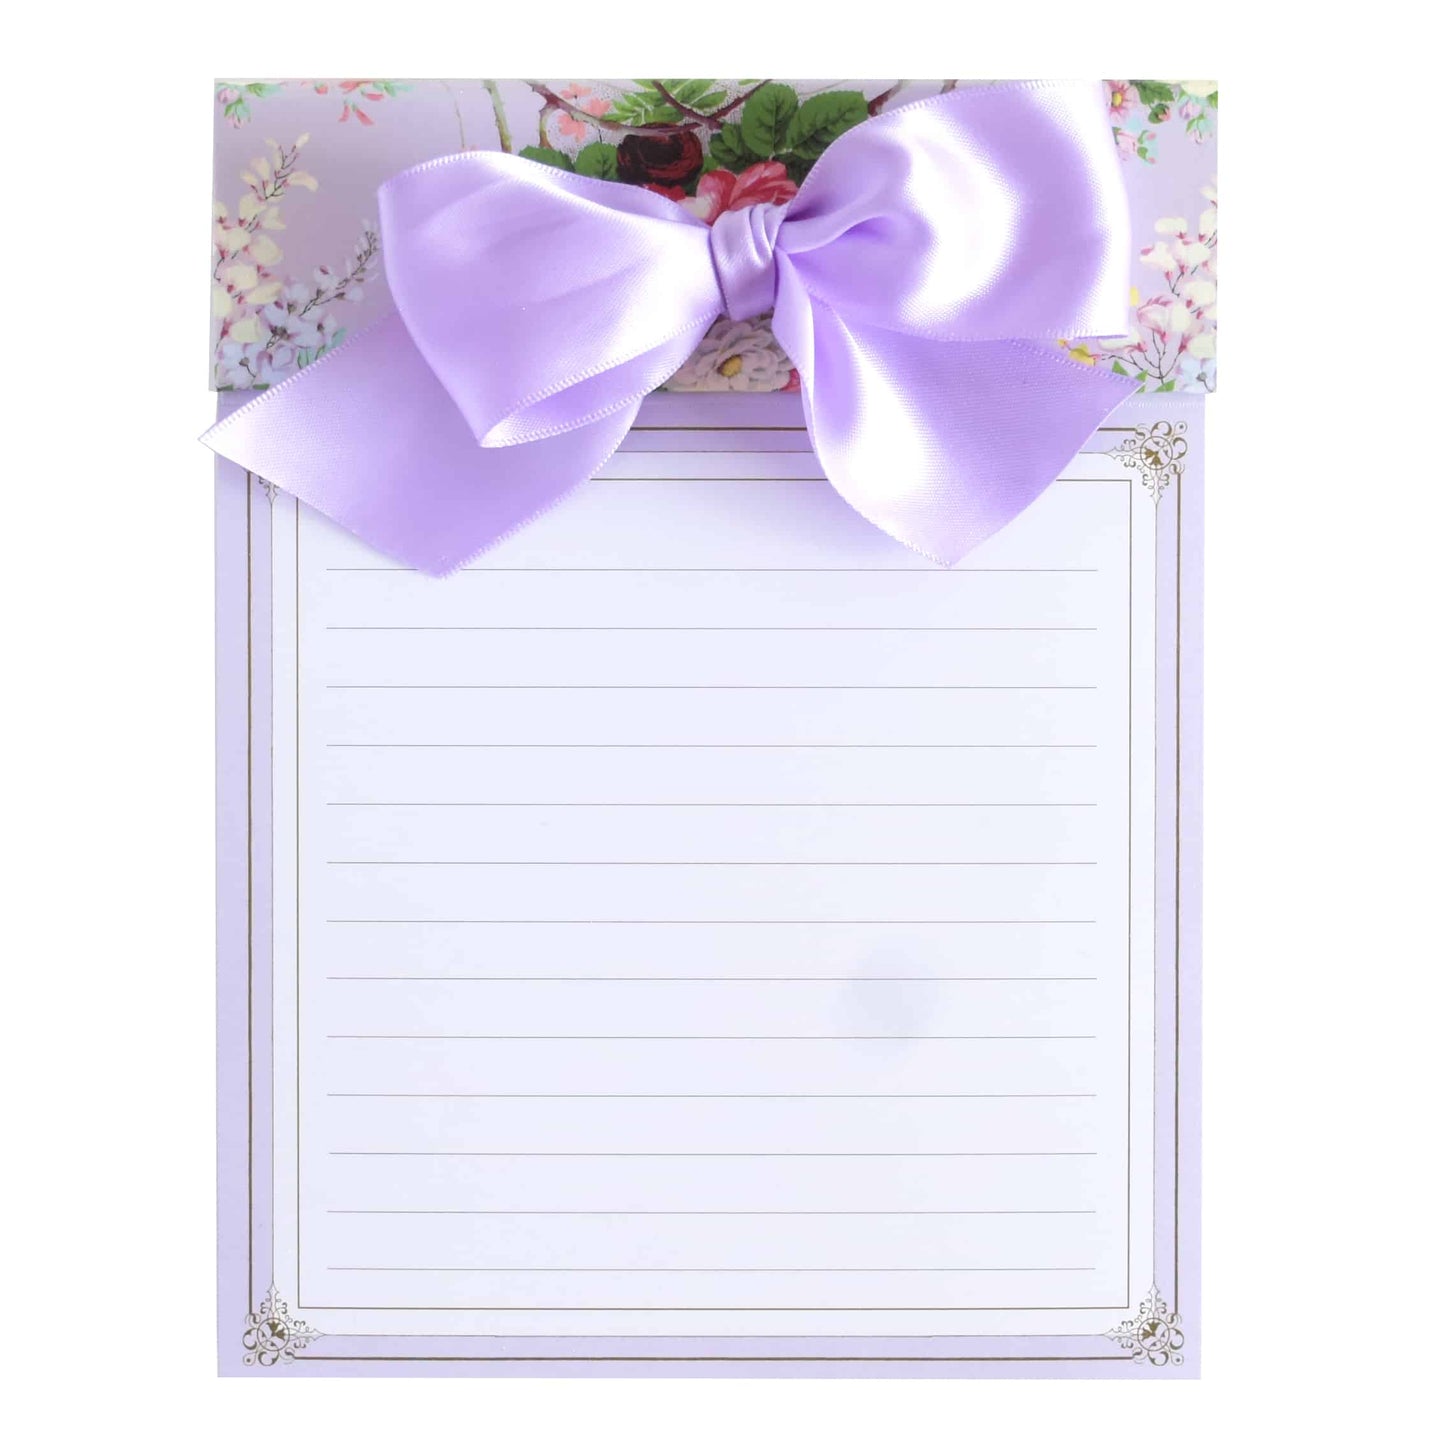 a notepad with a purple bow on top of it.